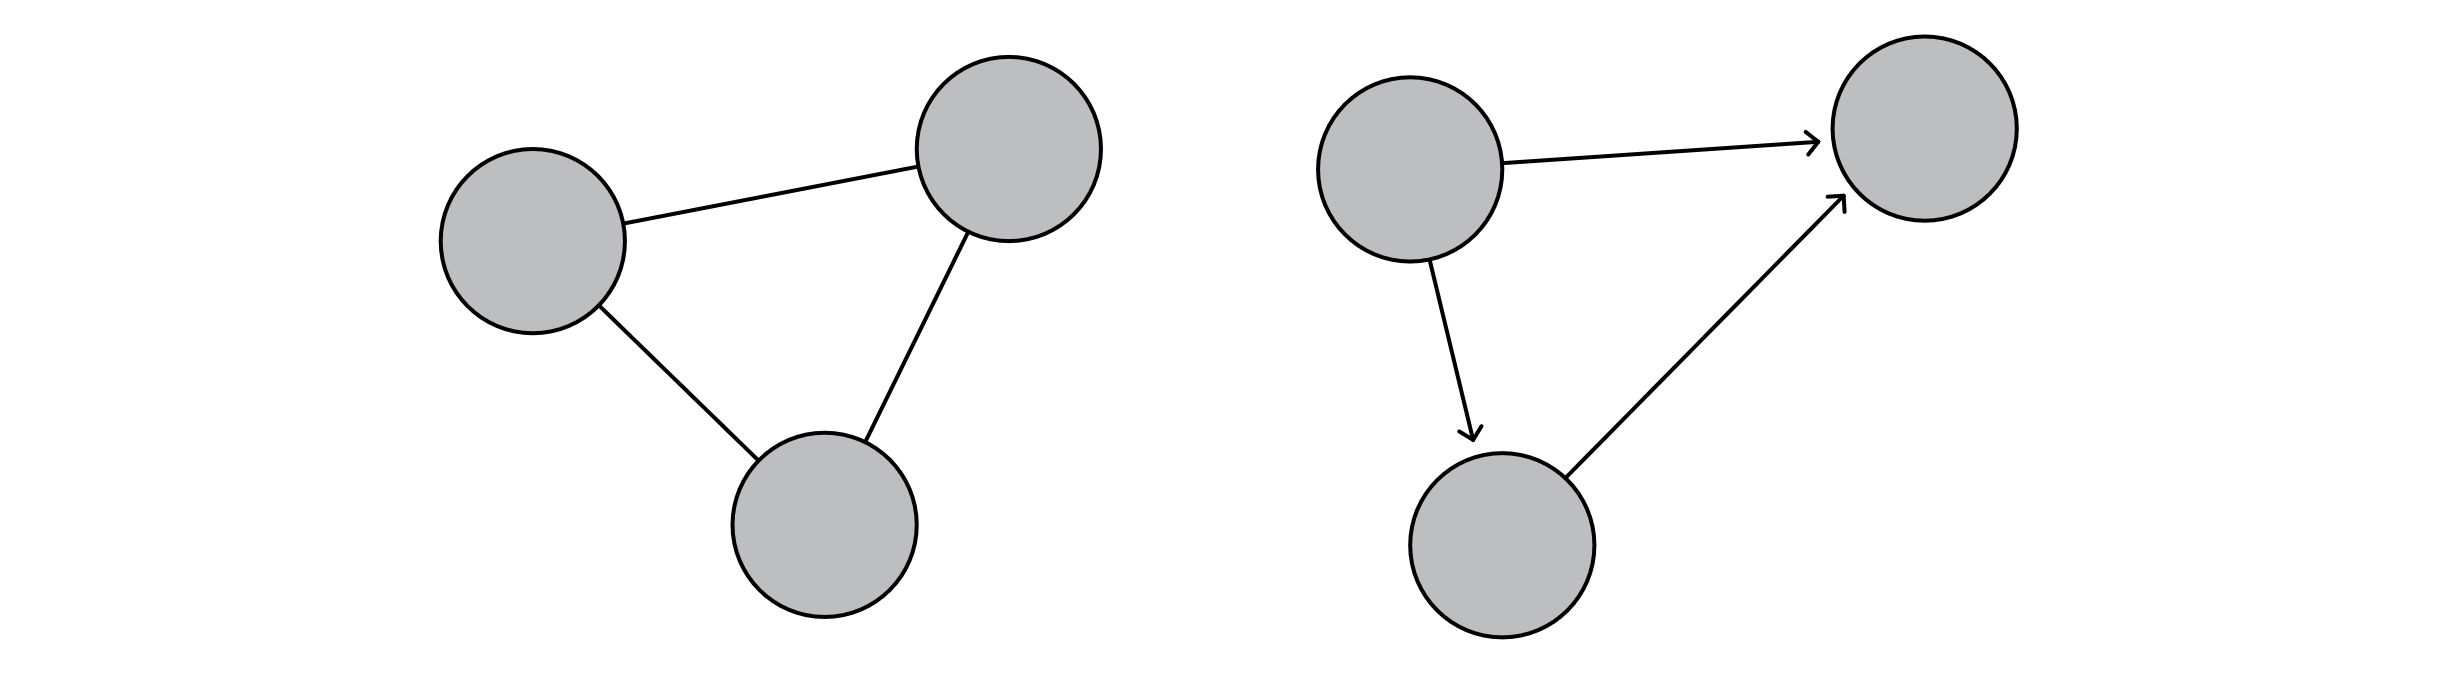 A pair of graphs indicating that direction is indicated using arrows on edges.